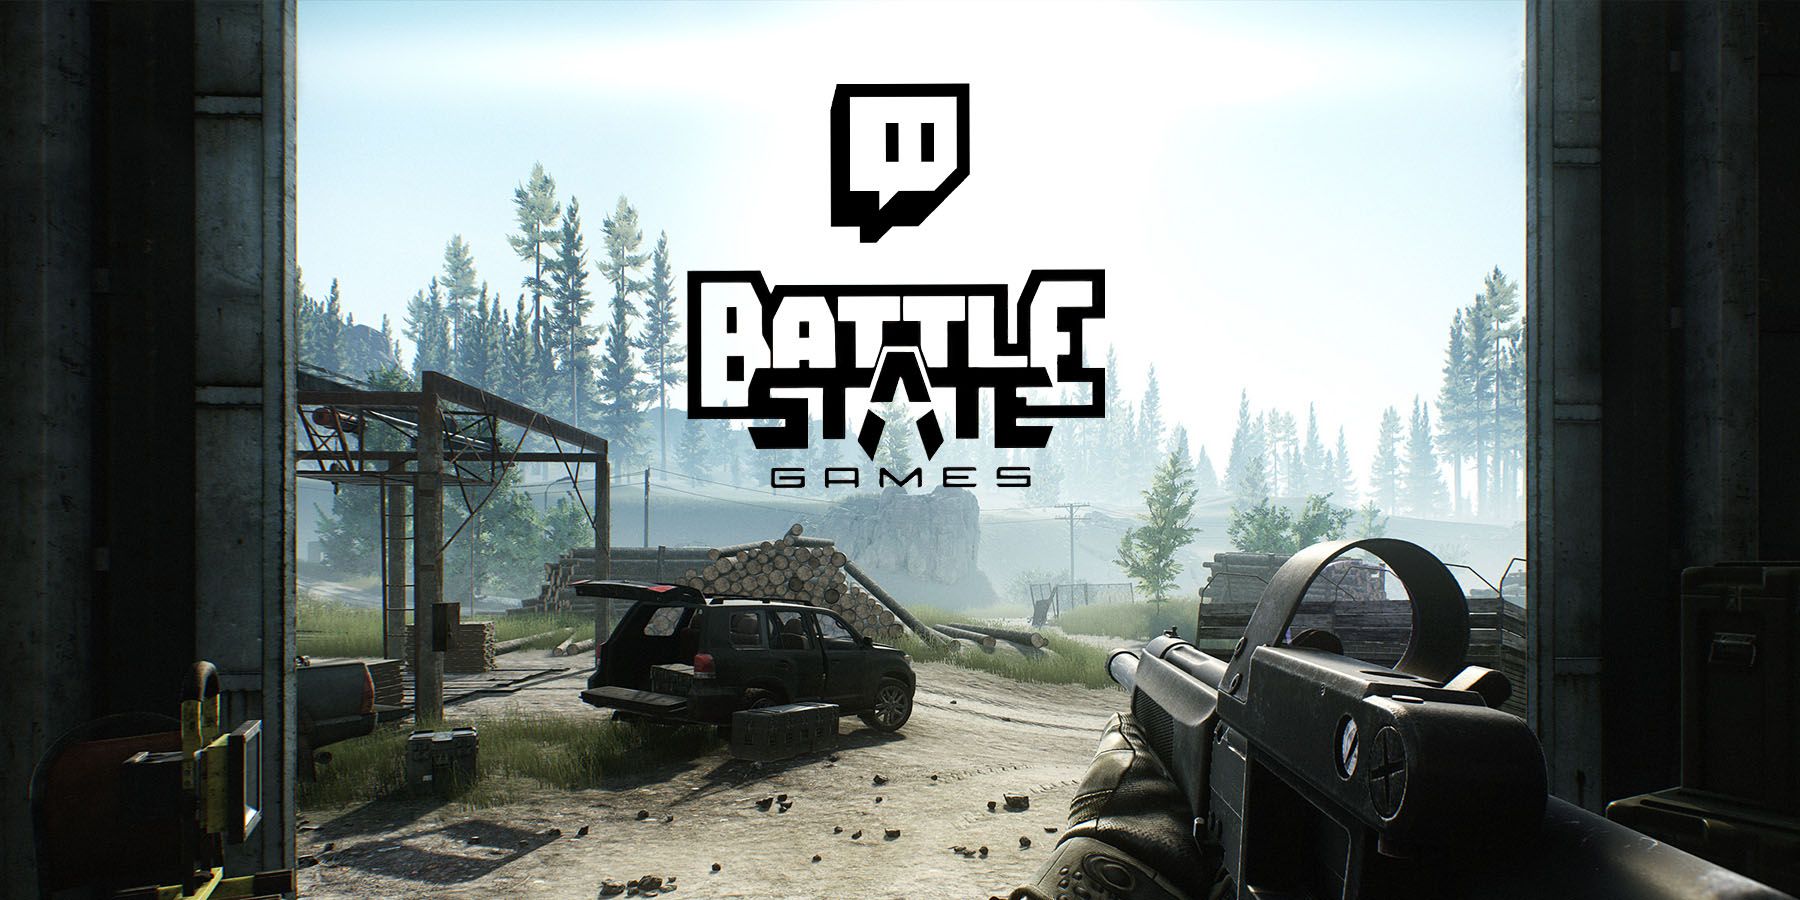 Battlestate Games Banned on Twitch During Drops Campaign